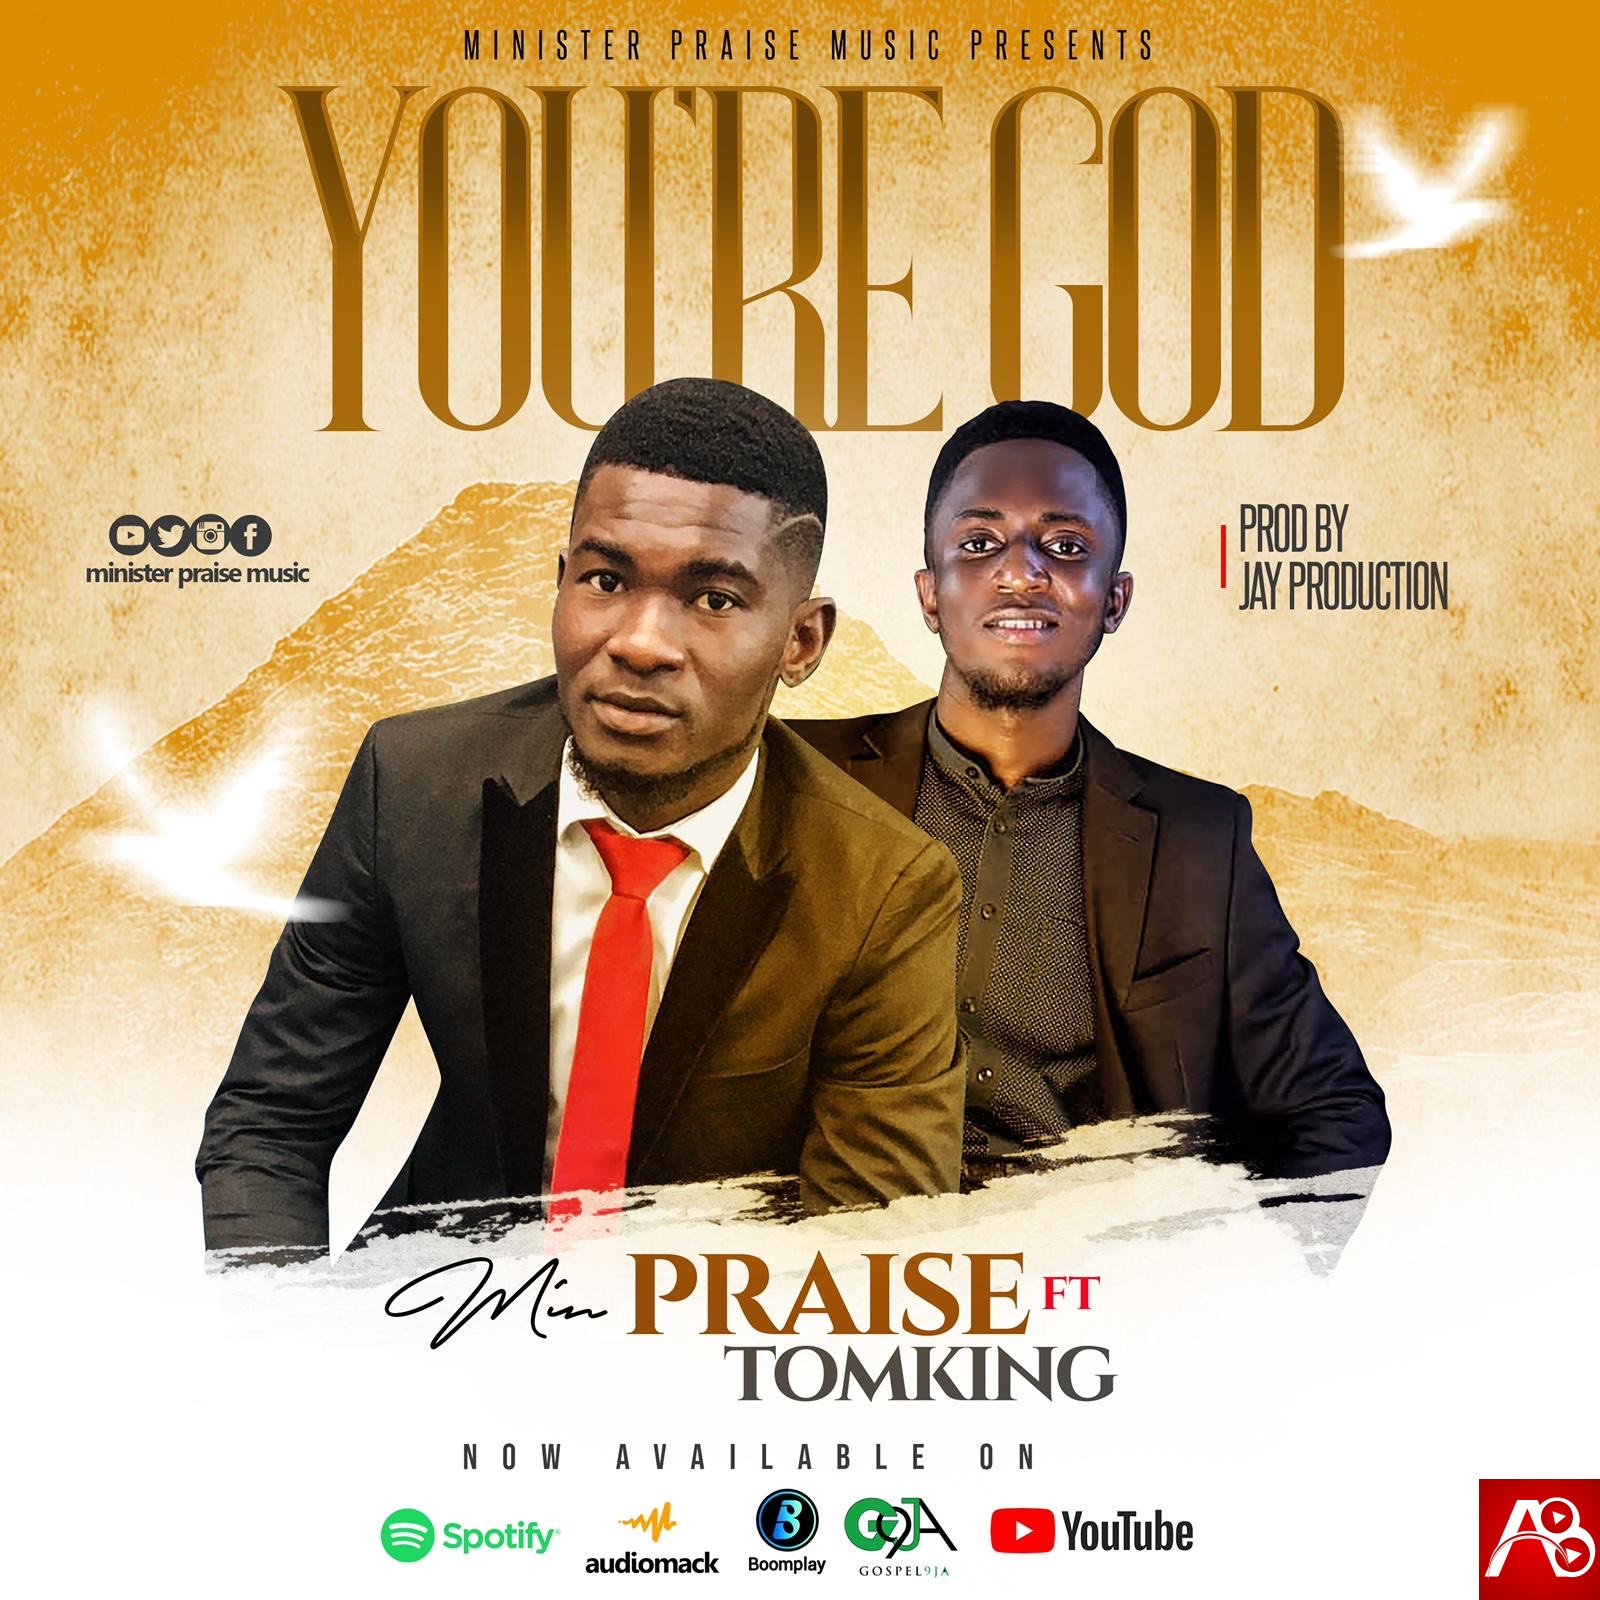 Minister Praise,You are God,Tomking,Minister Praise You are god   ,AllBaze,Get More Music @AllBaze.com,Download Naija Gospel songs, DOWNLOAD NIGERIAN GOSPEL MUSICE,Free Gospel Music Download,Gospel MP3, Gospel Music,Gospel Naija,GOSPEL SONGS, Gospel Audio songs free download,LATEST NAIJA GOSPEL MUSIC,Latest Nigeria Gospel Songs,Nigeria Gospel Music,Nigeria Gospel Song,Nigeria gospel songs,Nigerian Gospel Artists,NIGERIAN GOSPEL MUSIC,Naija Loaded Gospel,Christian Song,Christian Songs,